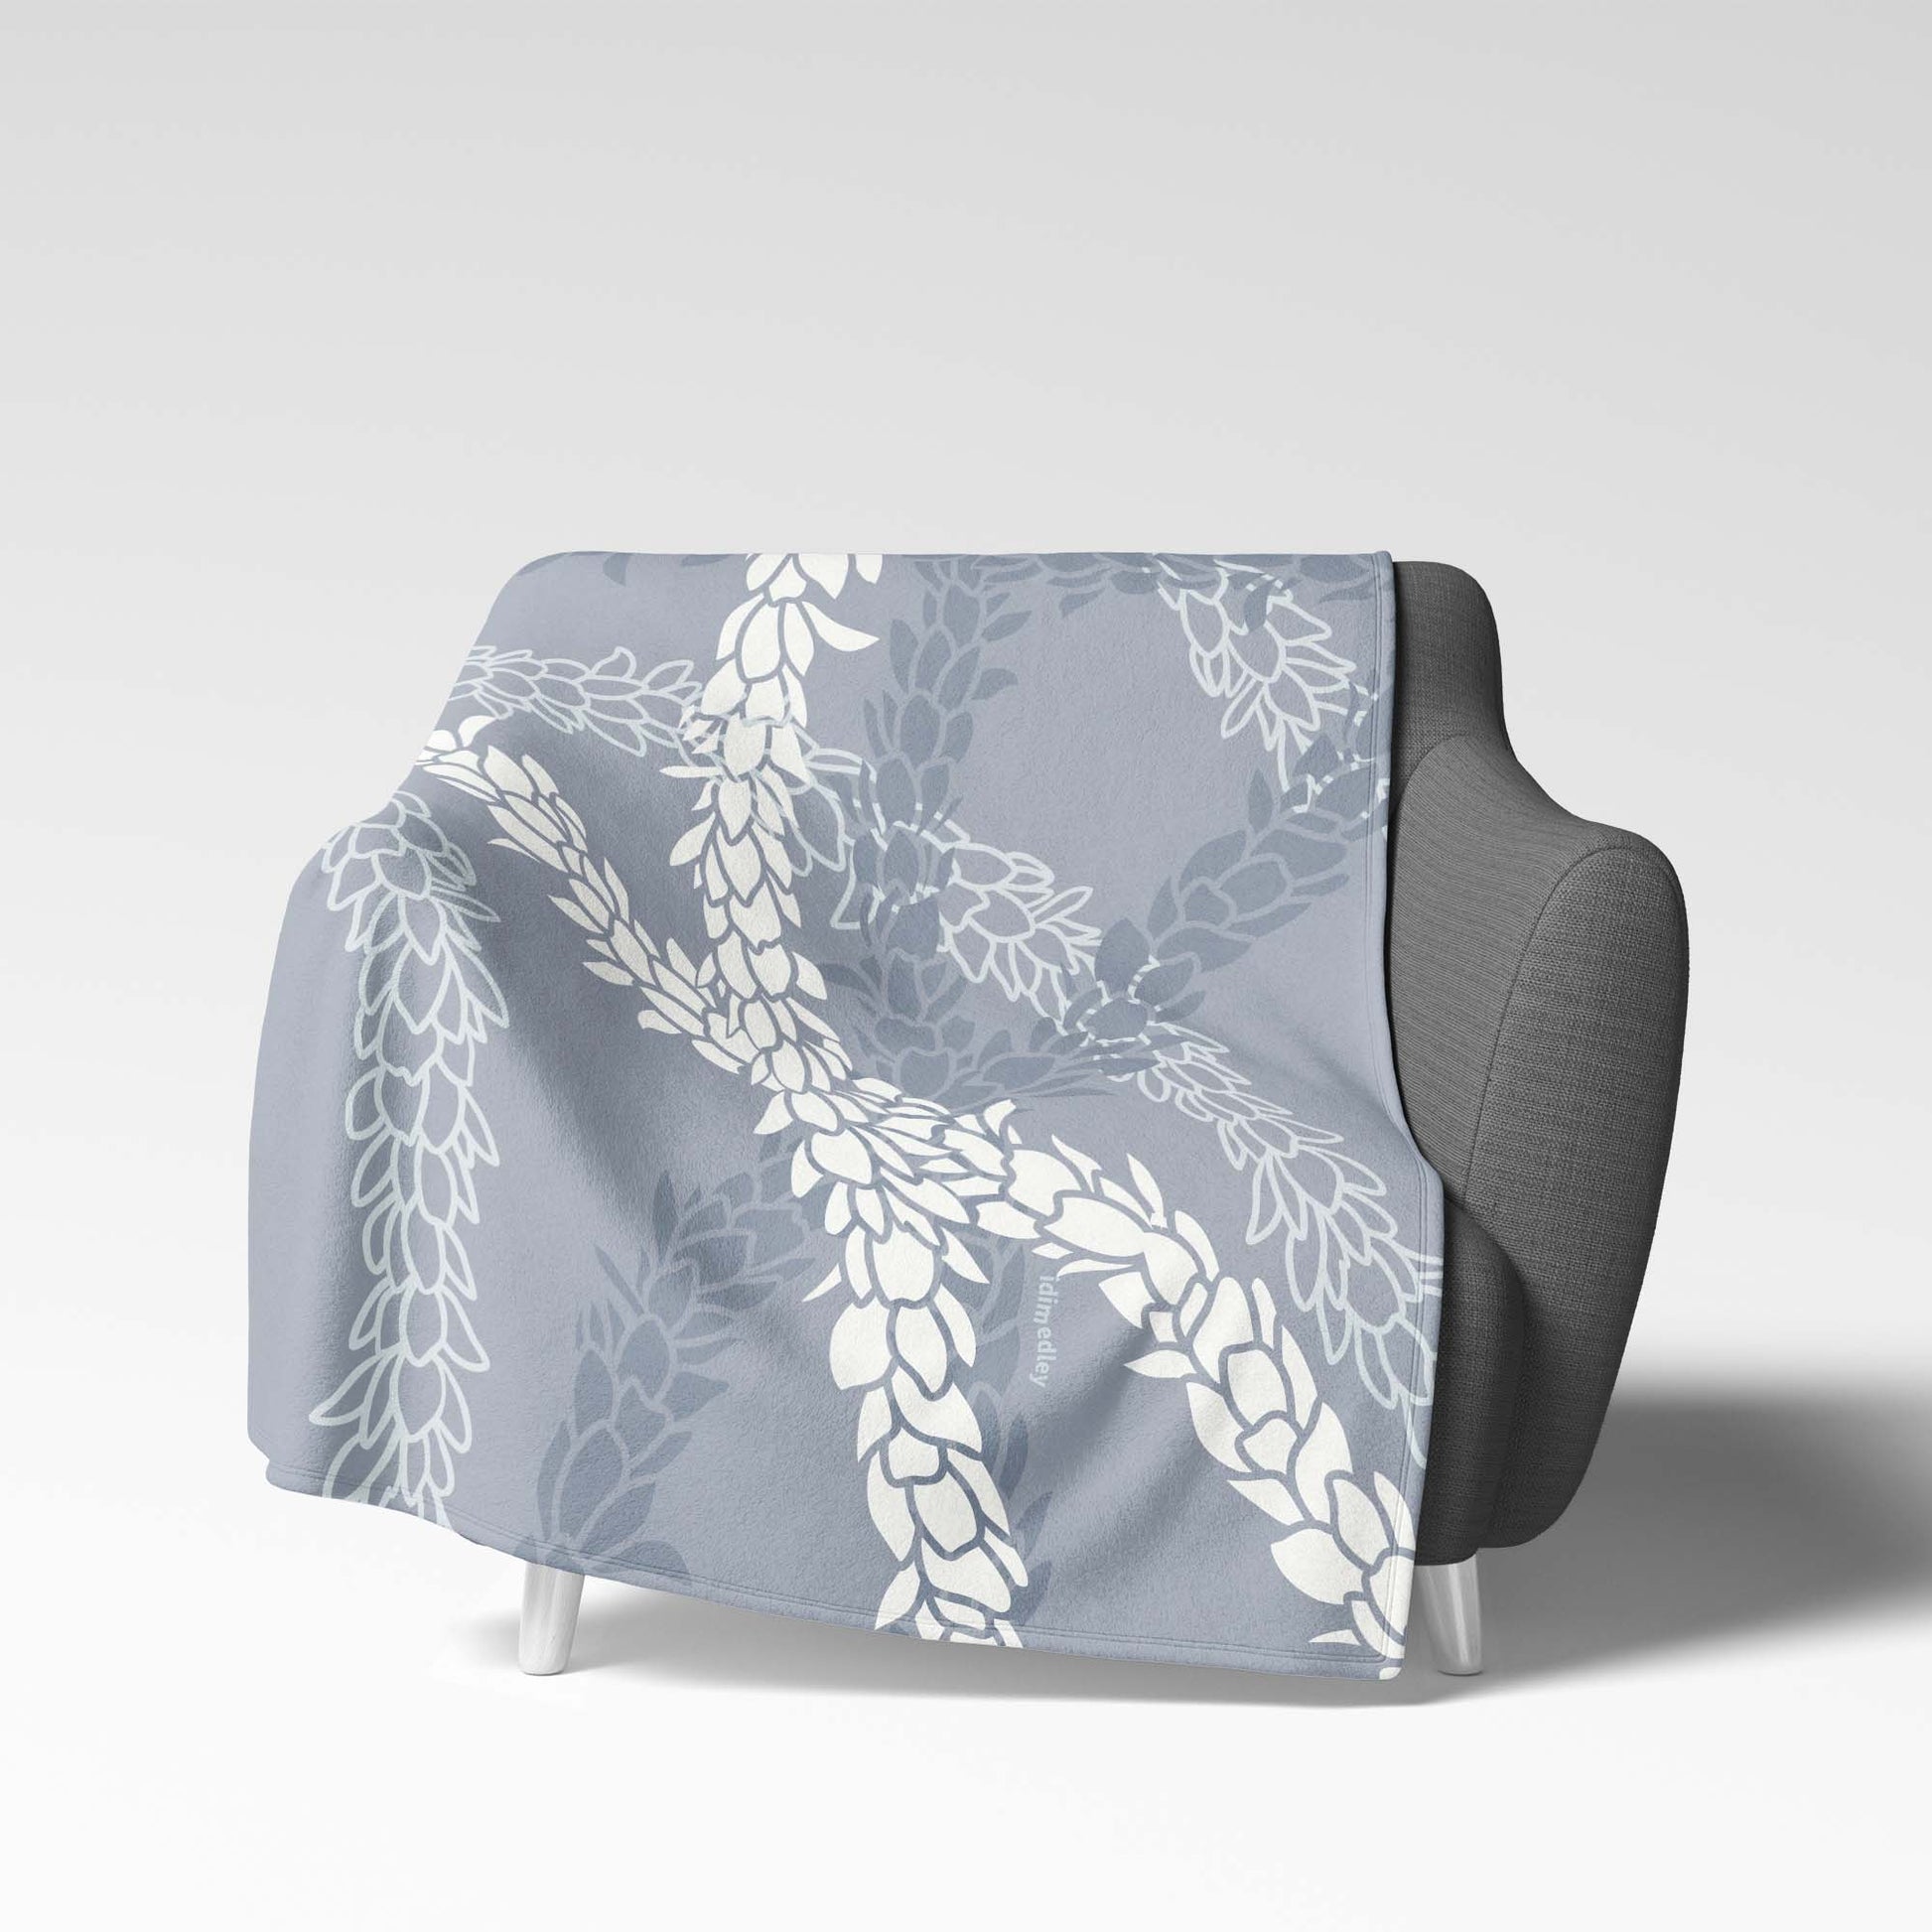 Soft velveteen blanket with a design displaying multiple Pikake flower lei strands in shades of gray and white silhouettes and white line art on a light blue background.